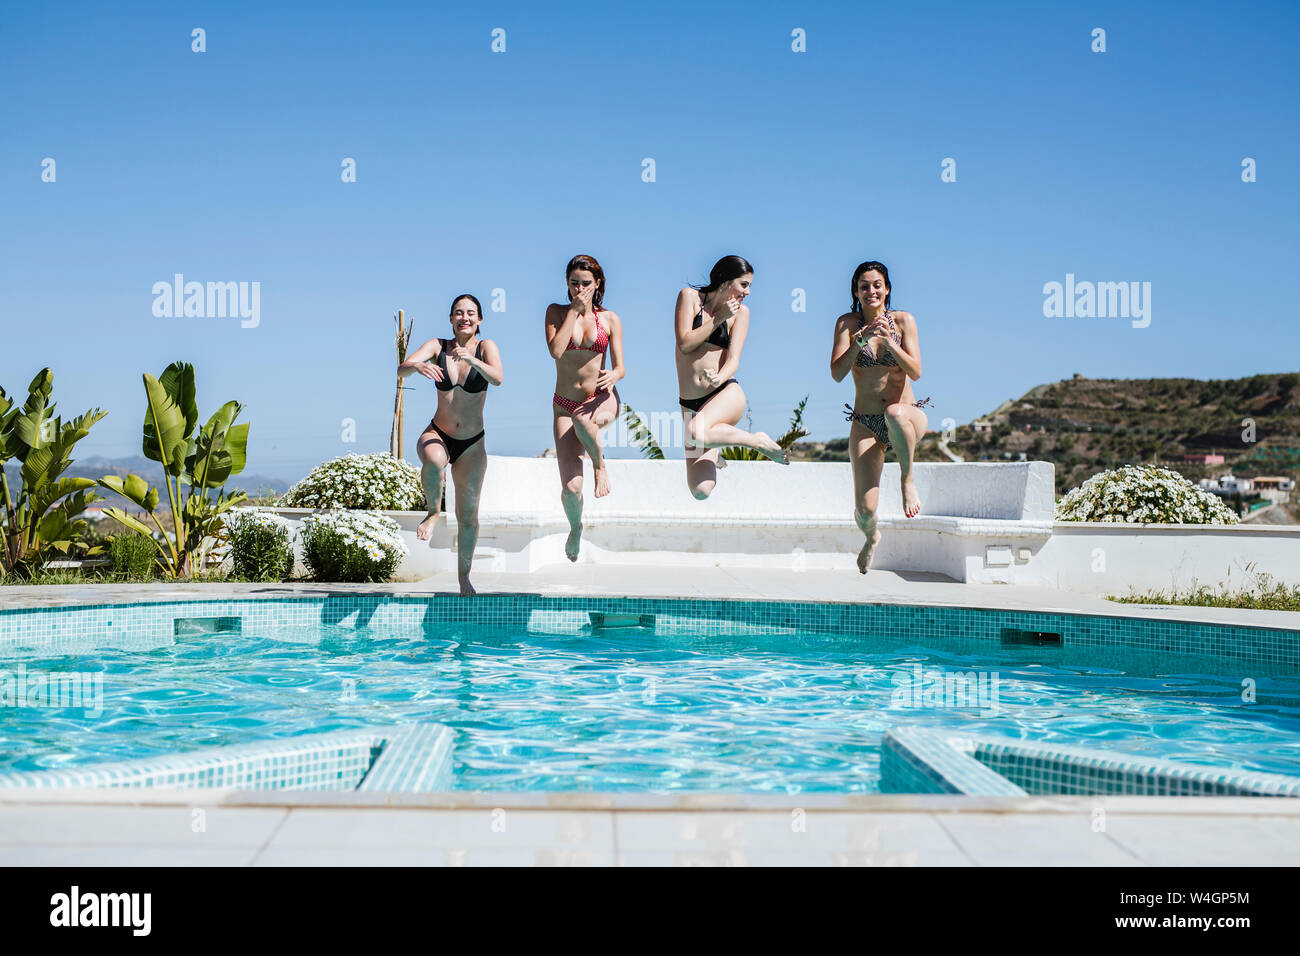 Young women enjoying the summer time at pool, jumping into the water Stock Photo